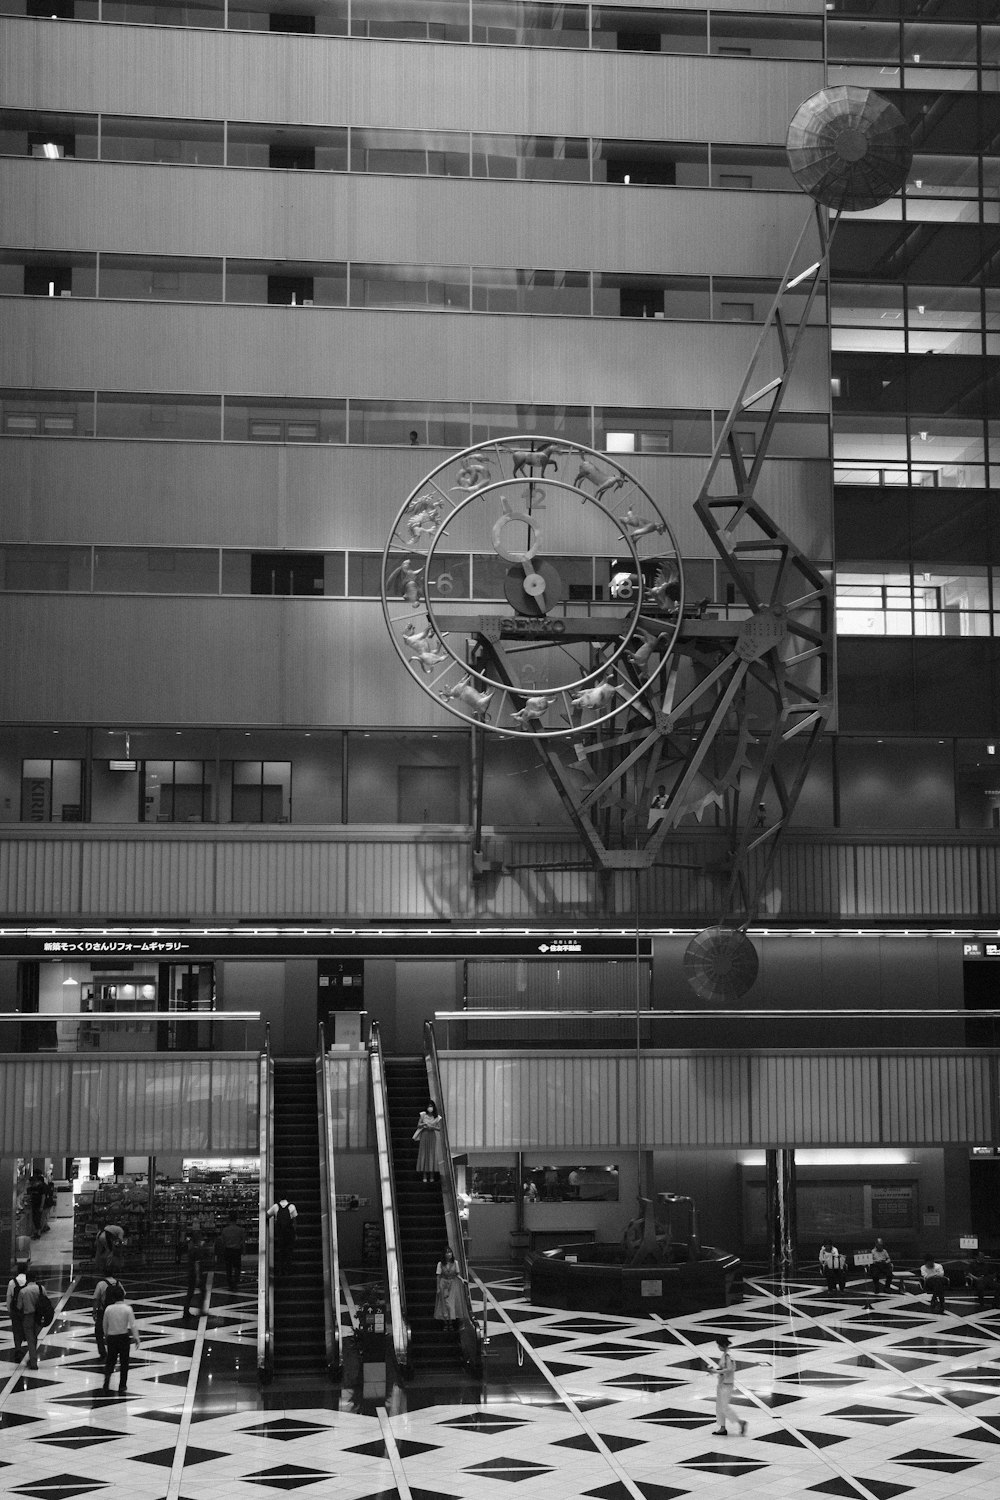 a black and white photo of a clock in a building